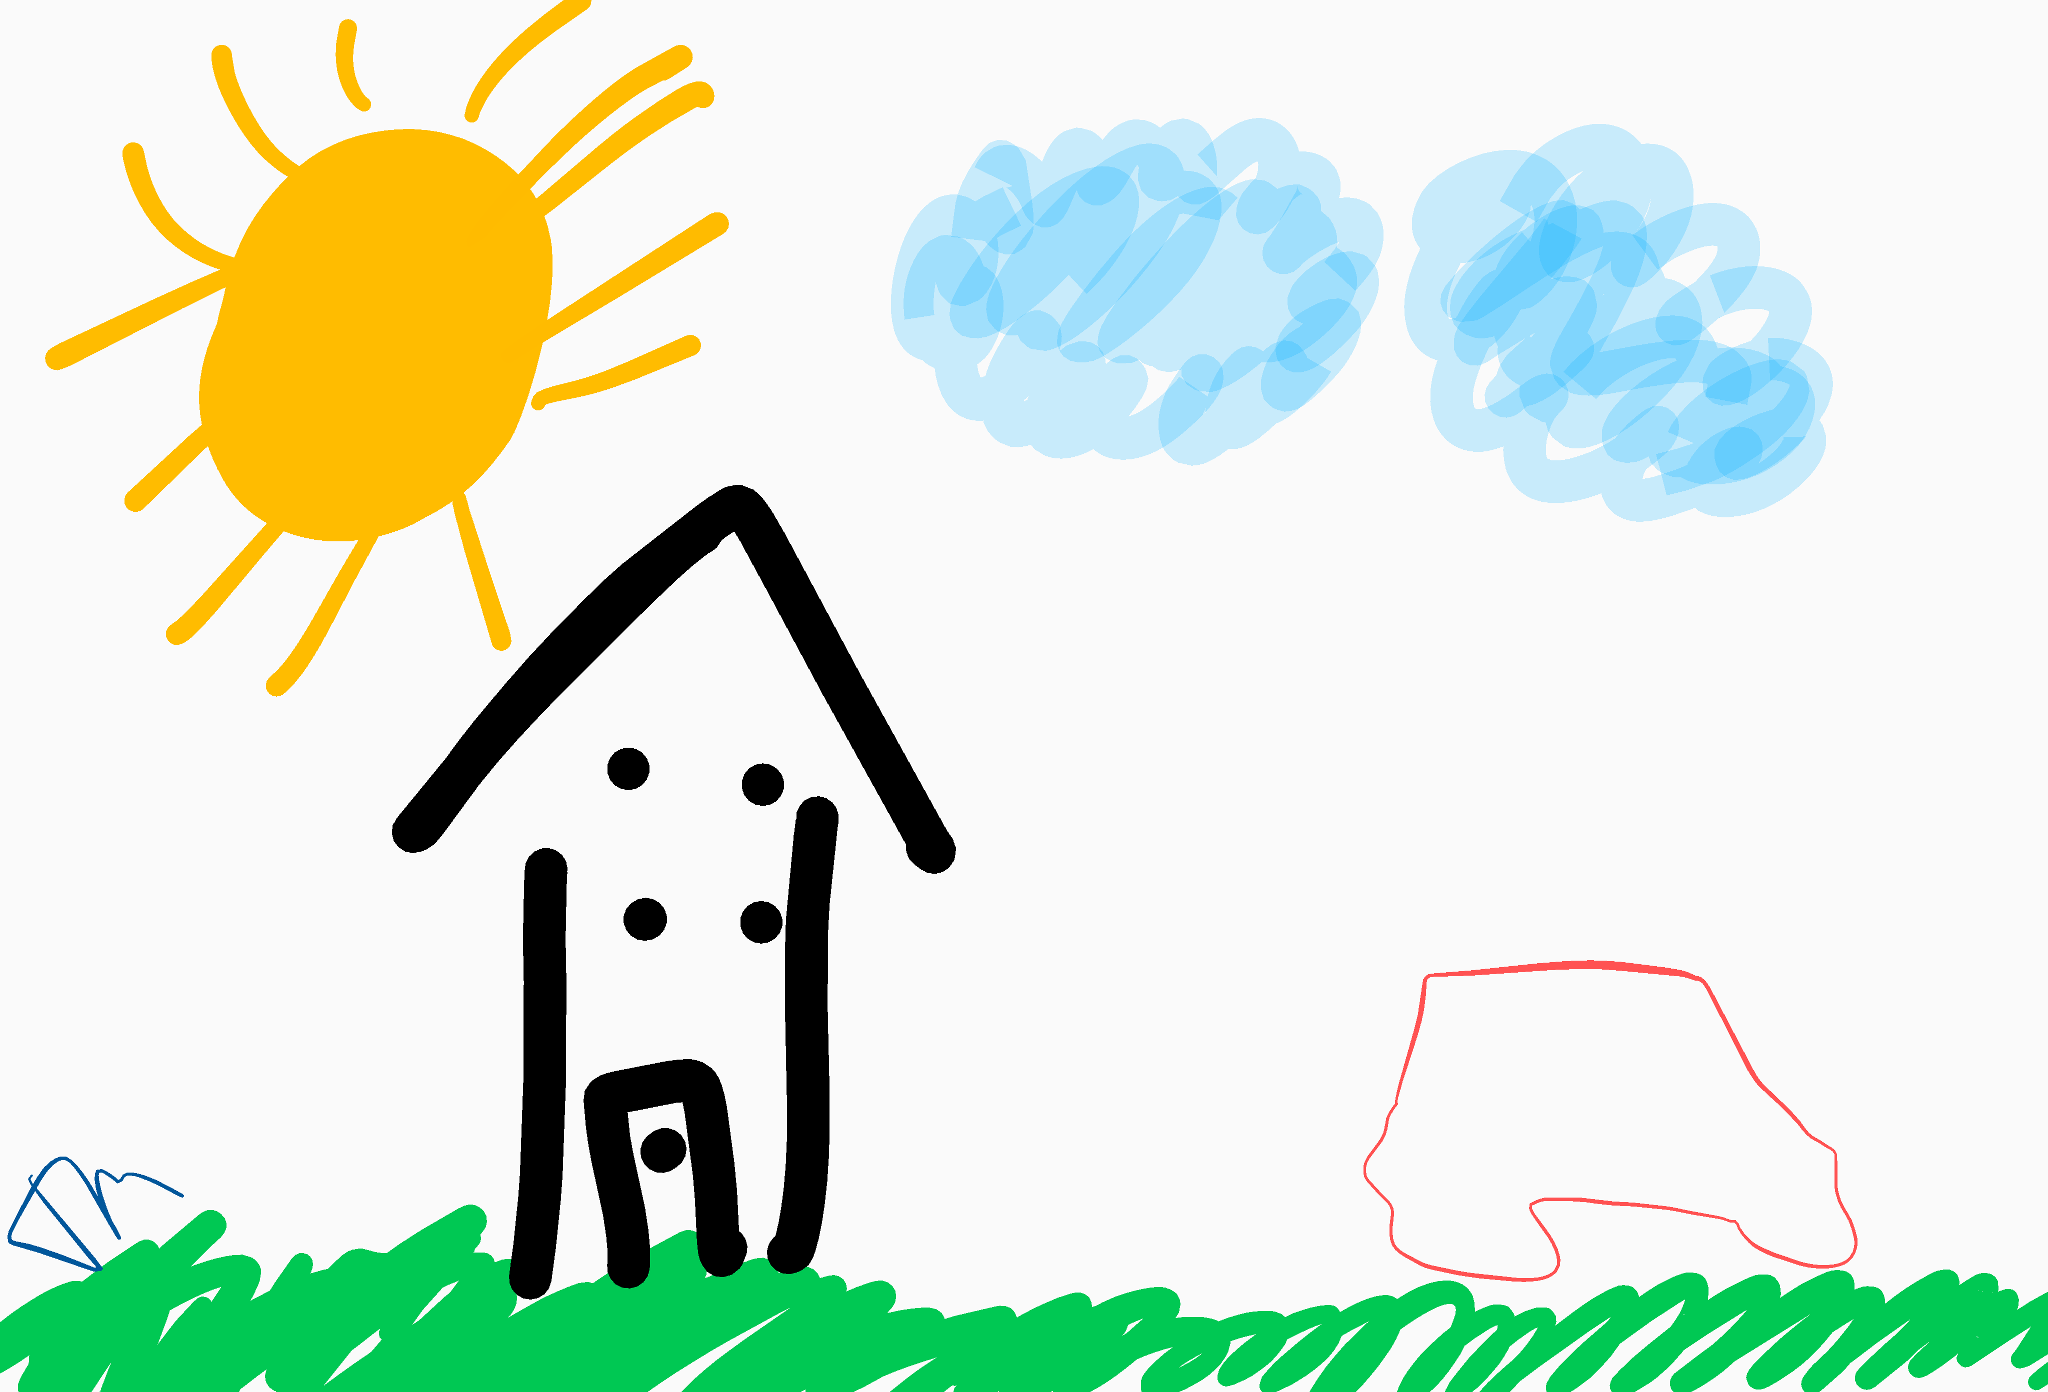 Sketch of a house and car on a sunny day.